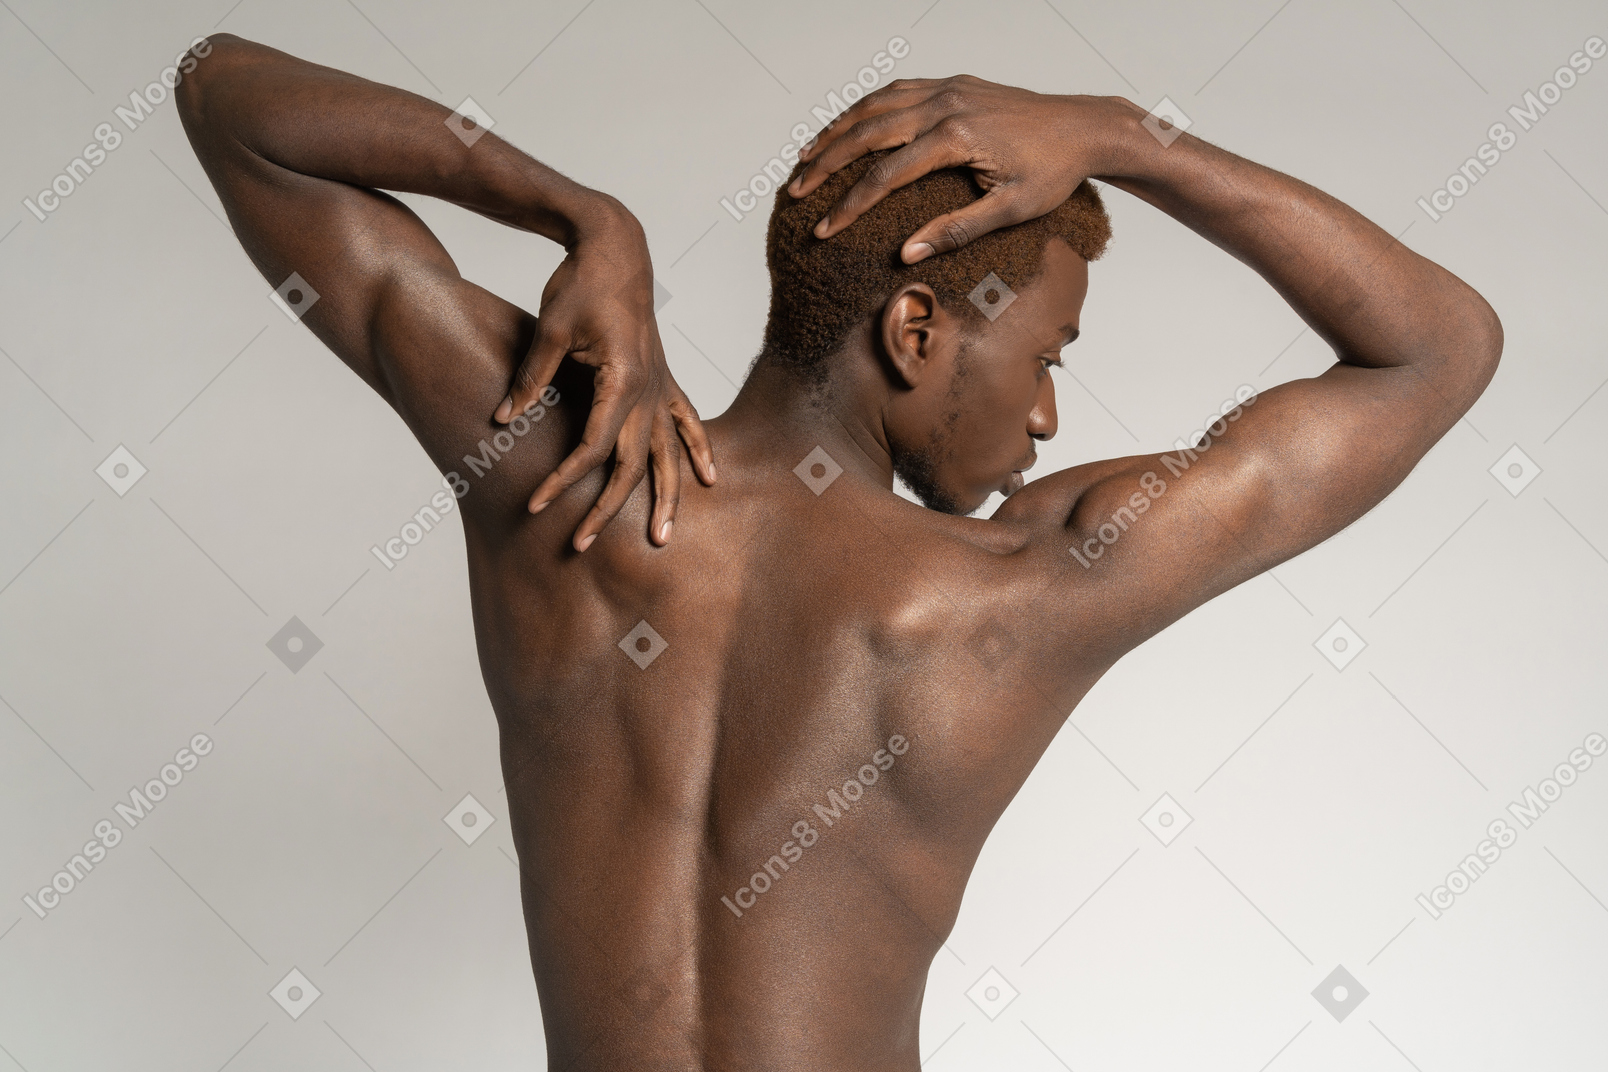 Topless man touching back and head